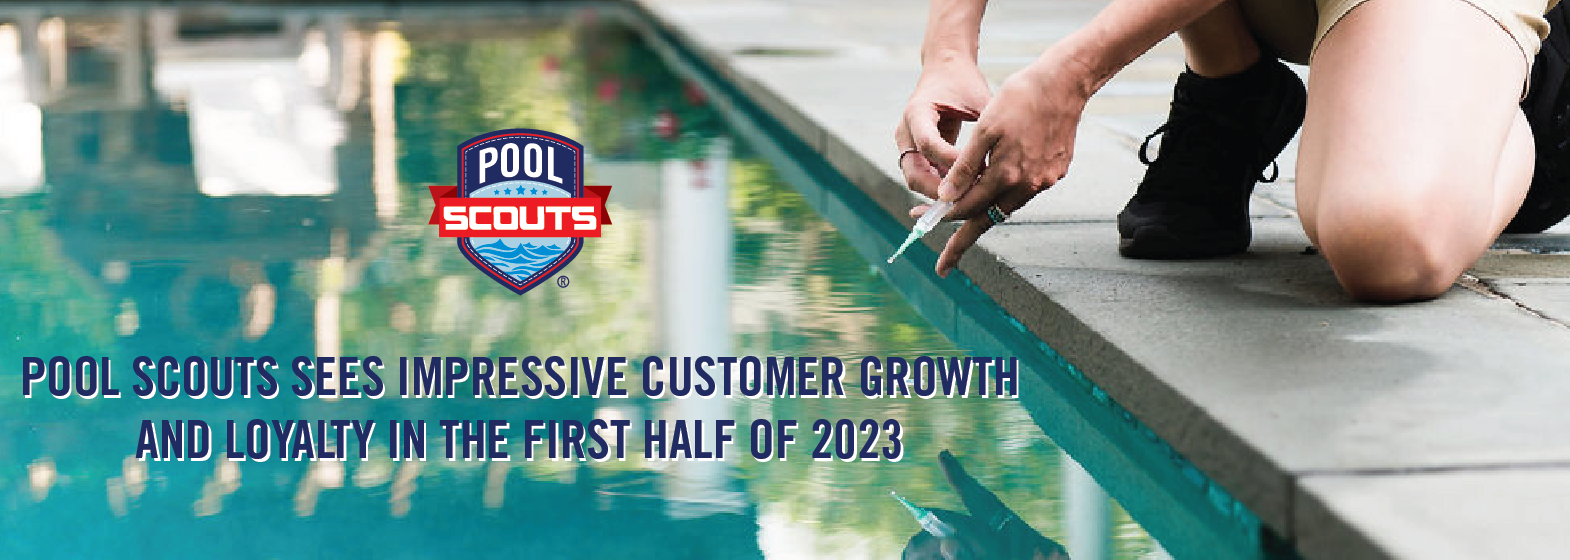 Image of Pool Scouts Sees Impressive Customer Growth and Loyalty in the First Half of 2023